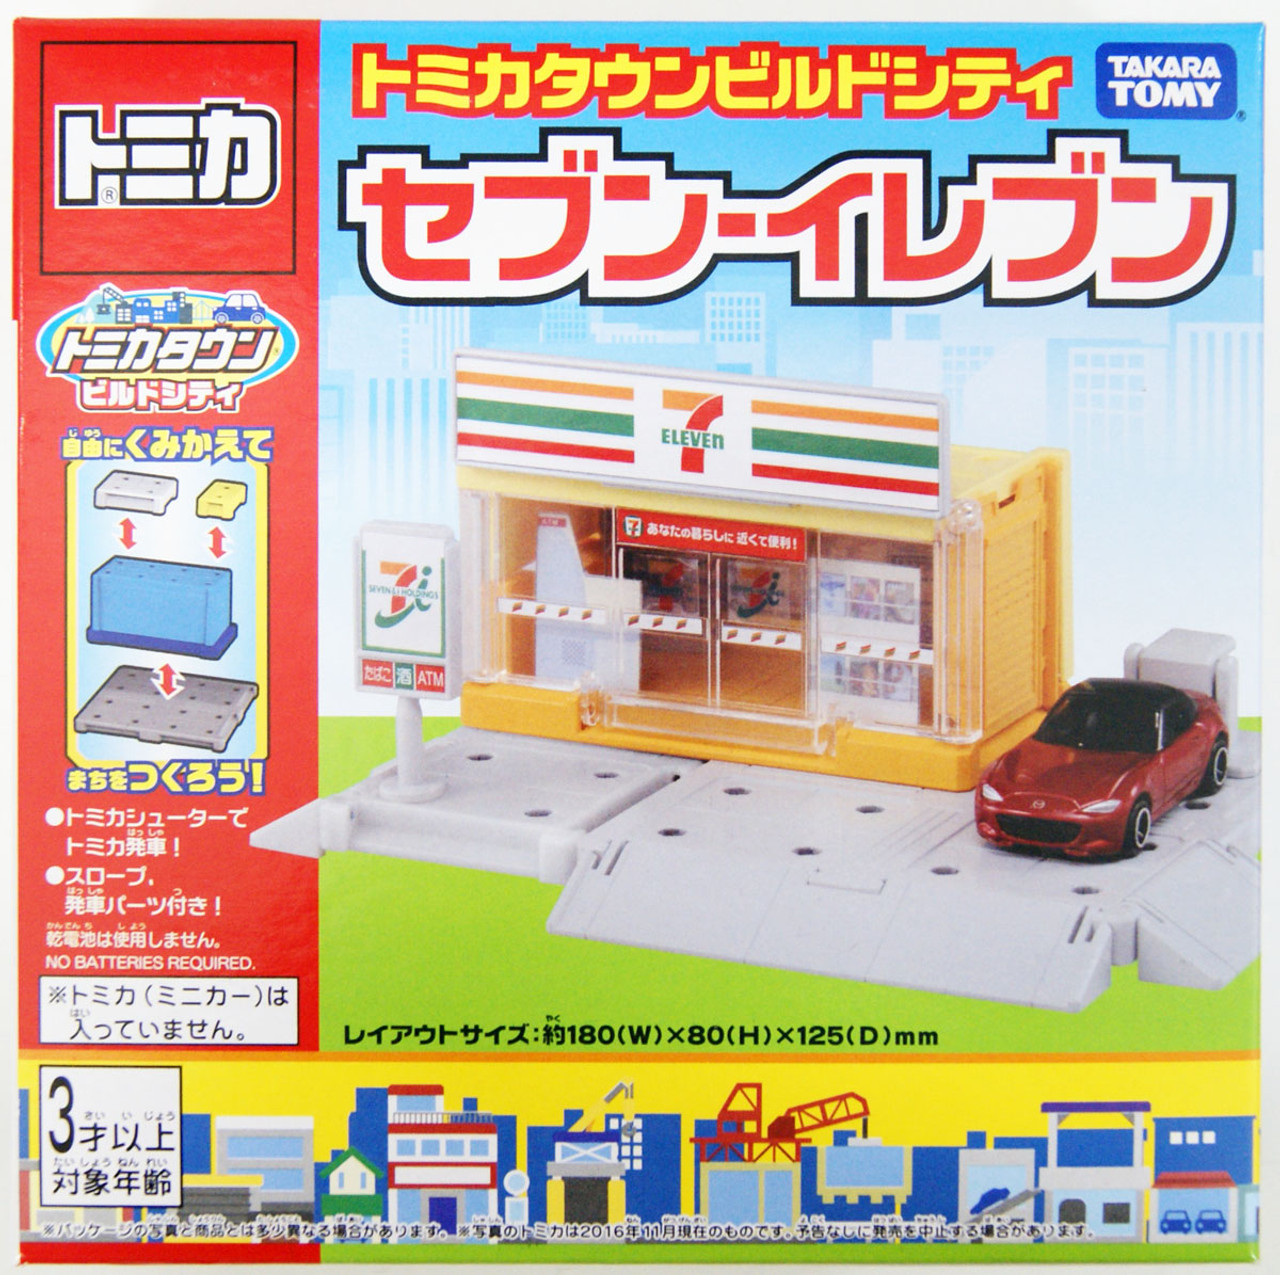 Takara Tomy Tomica Town Build City 7 Eleven